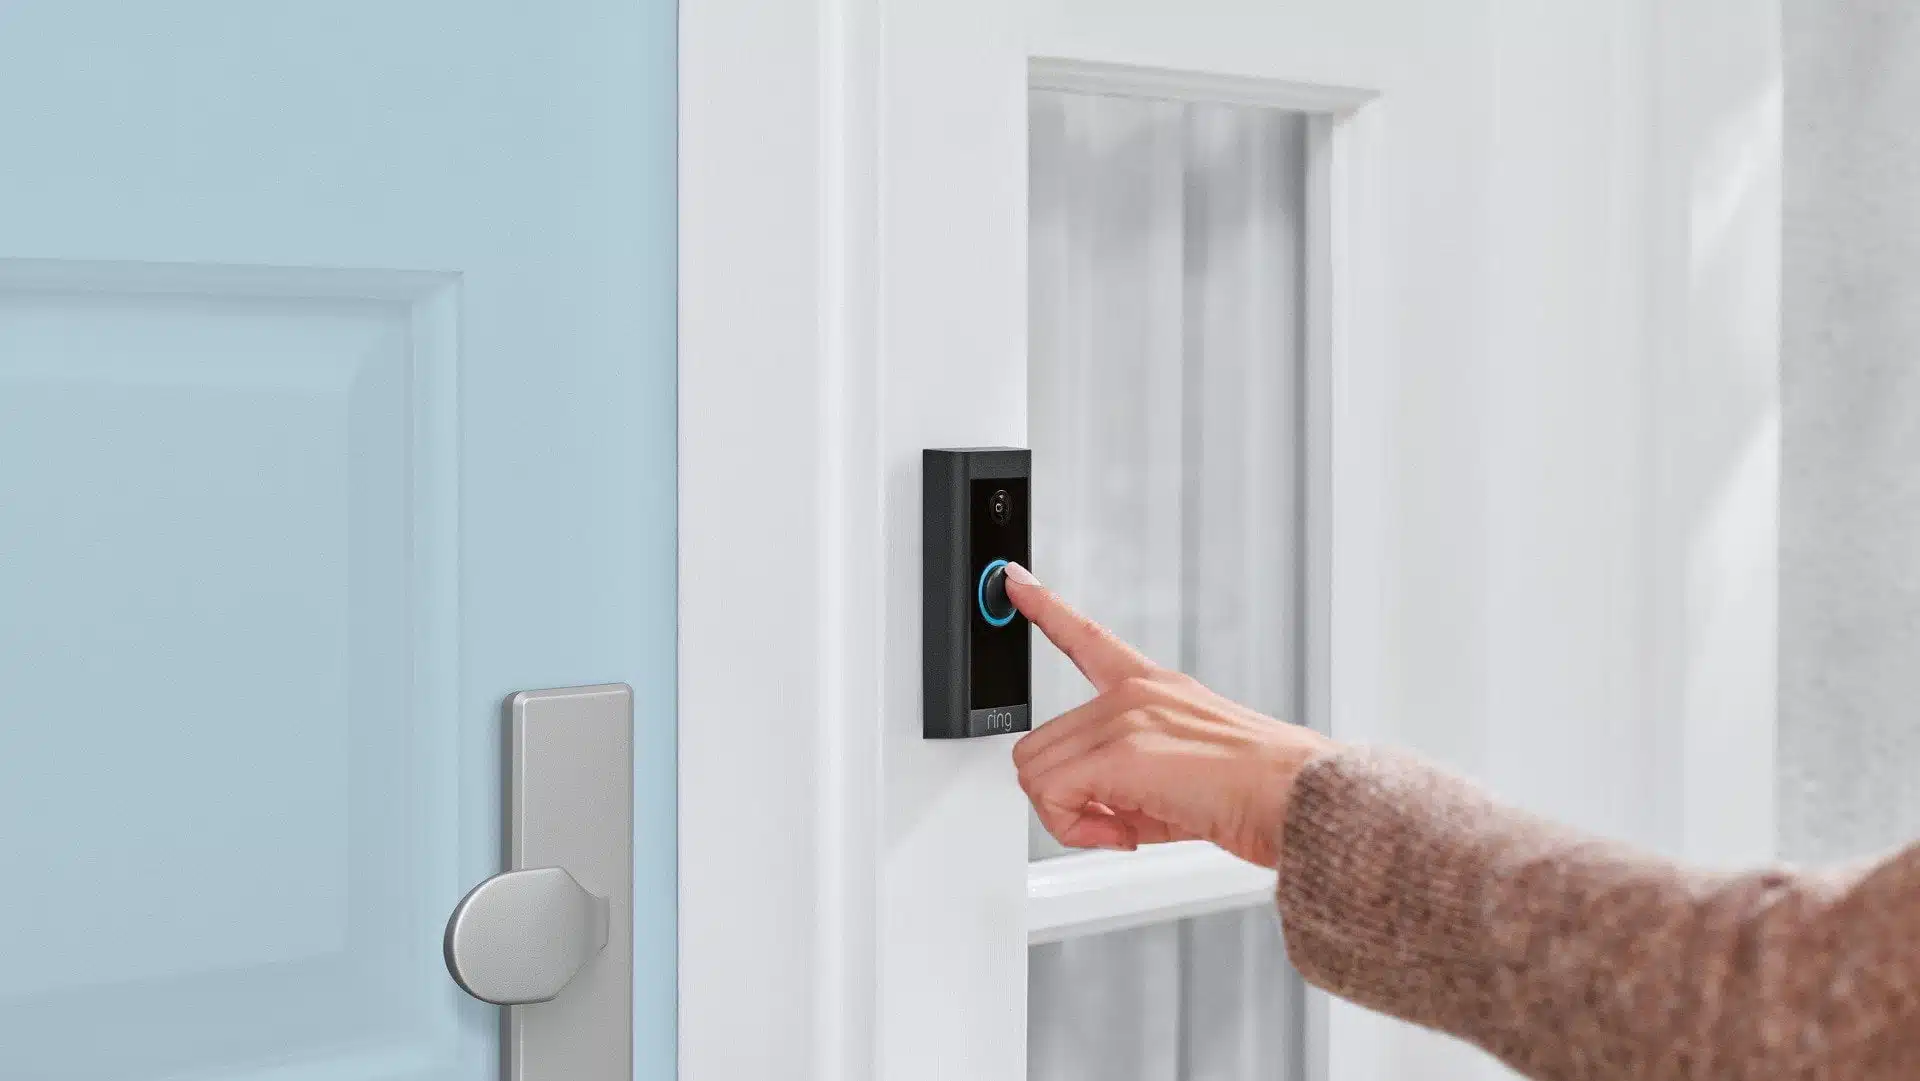 Ring Doorbell Wired